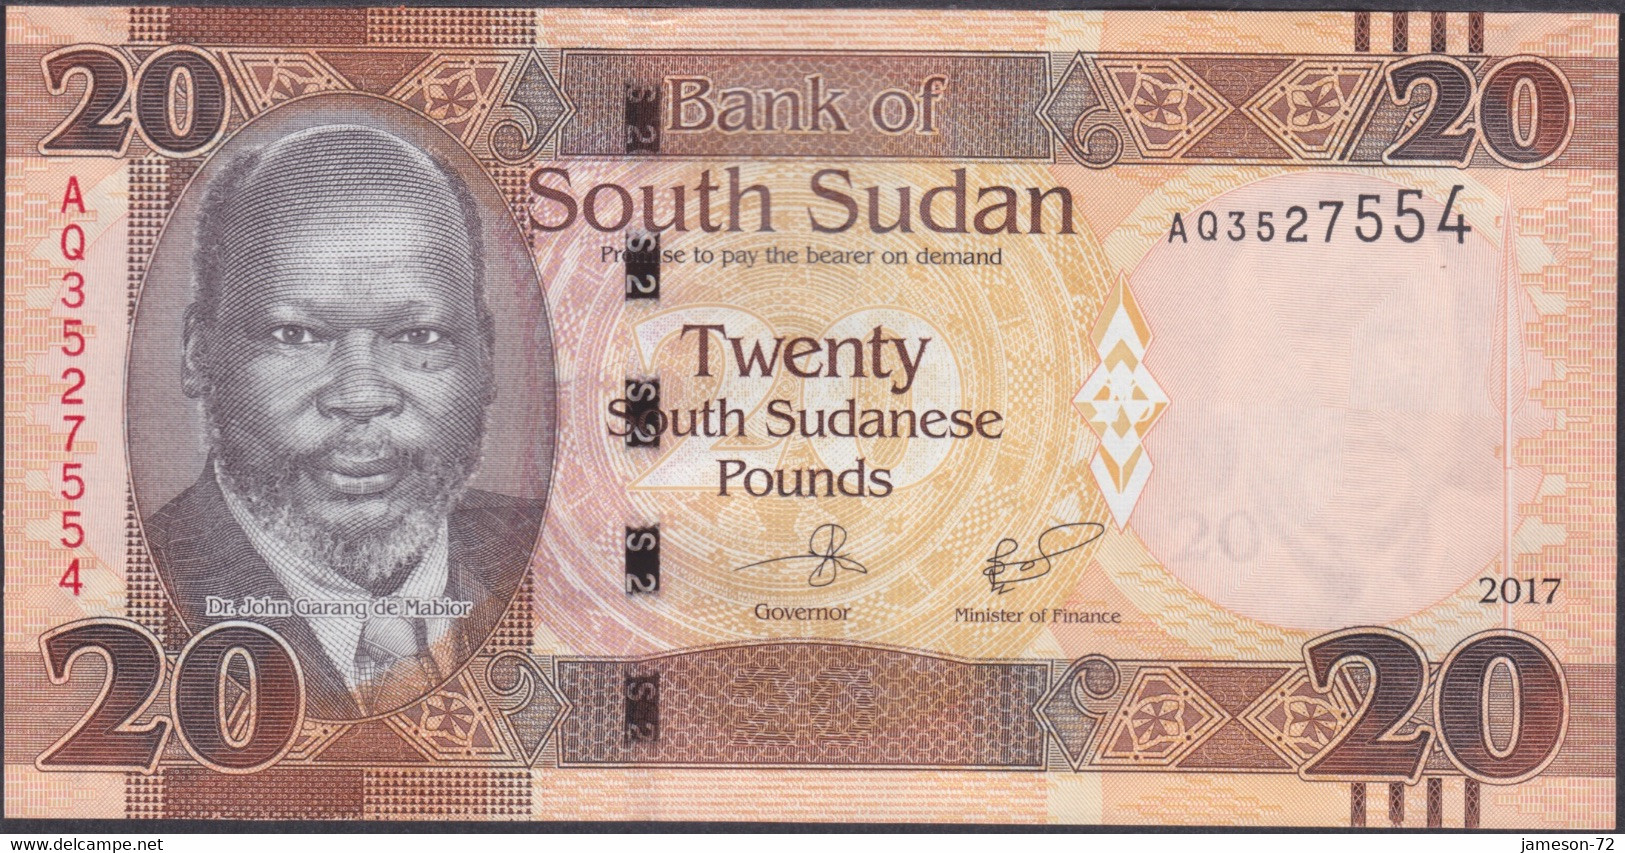 SOUTH SUDAN - 20 Pounds 2017 Africa Banknote - Edelweiss Coins - Sudan Del Sud